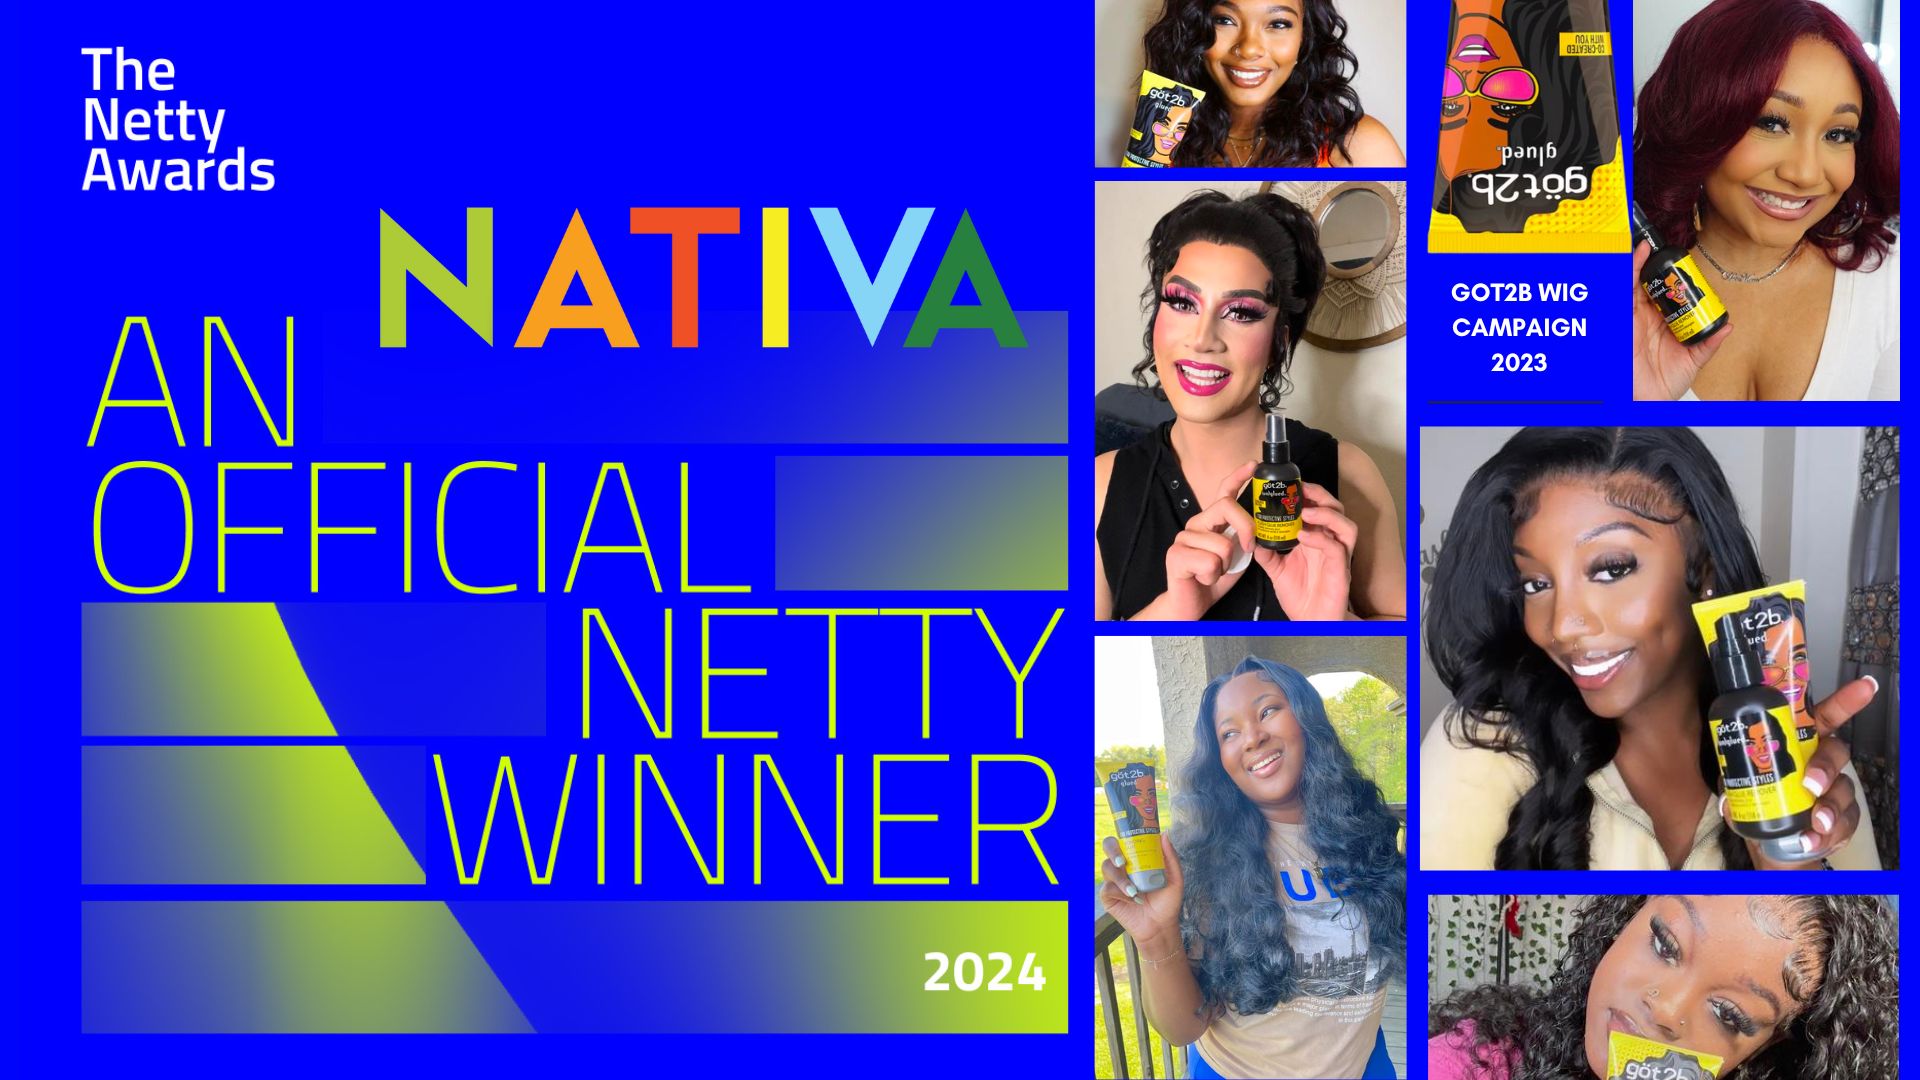 Nativa Multicultural Agency Wins Netty Award for Digital Marketing Excellence